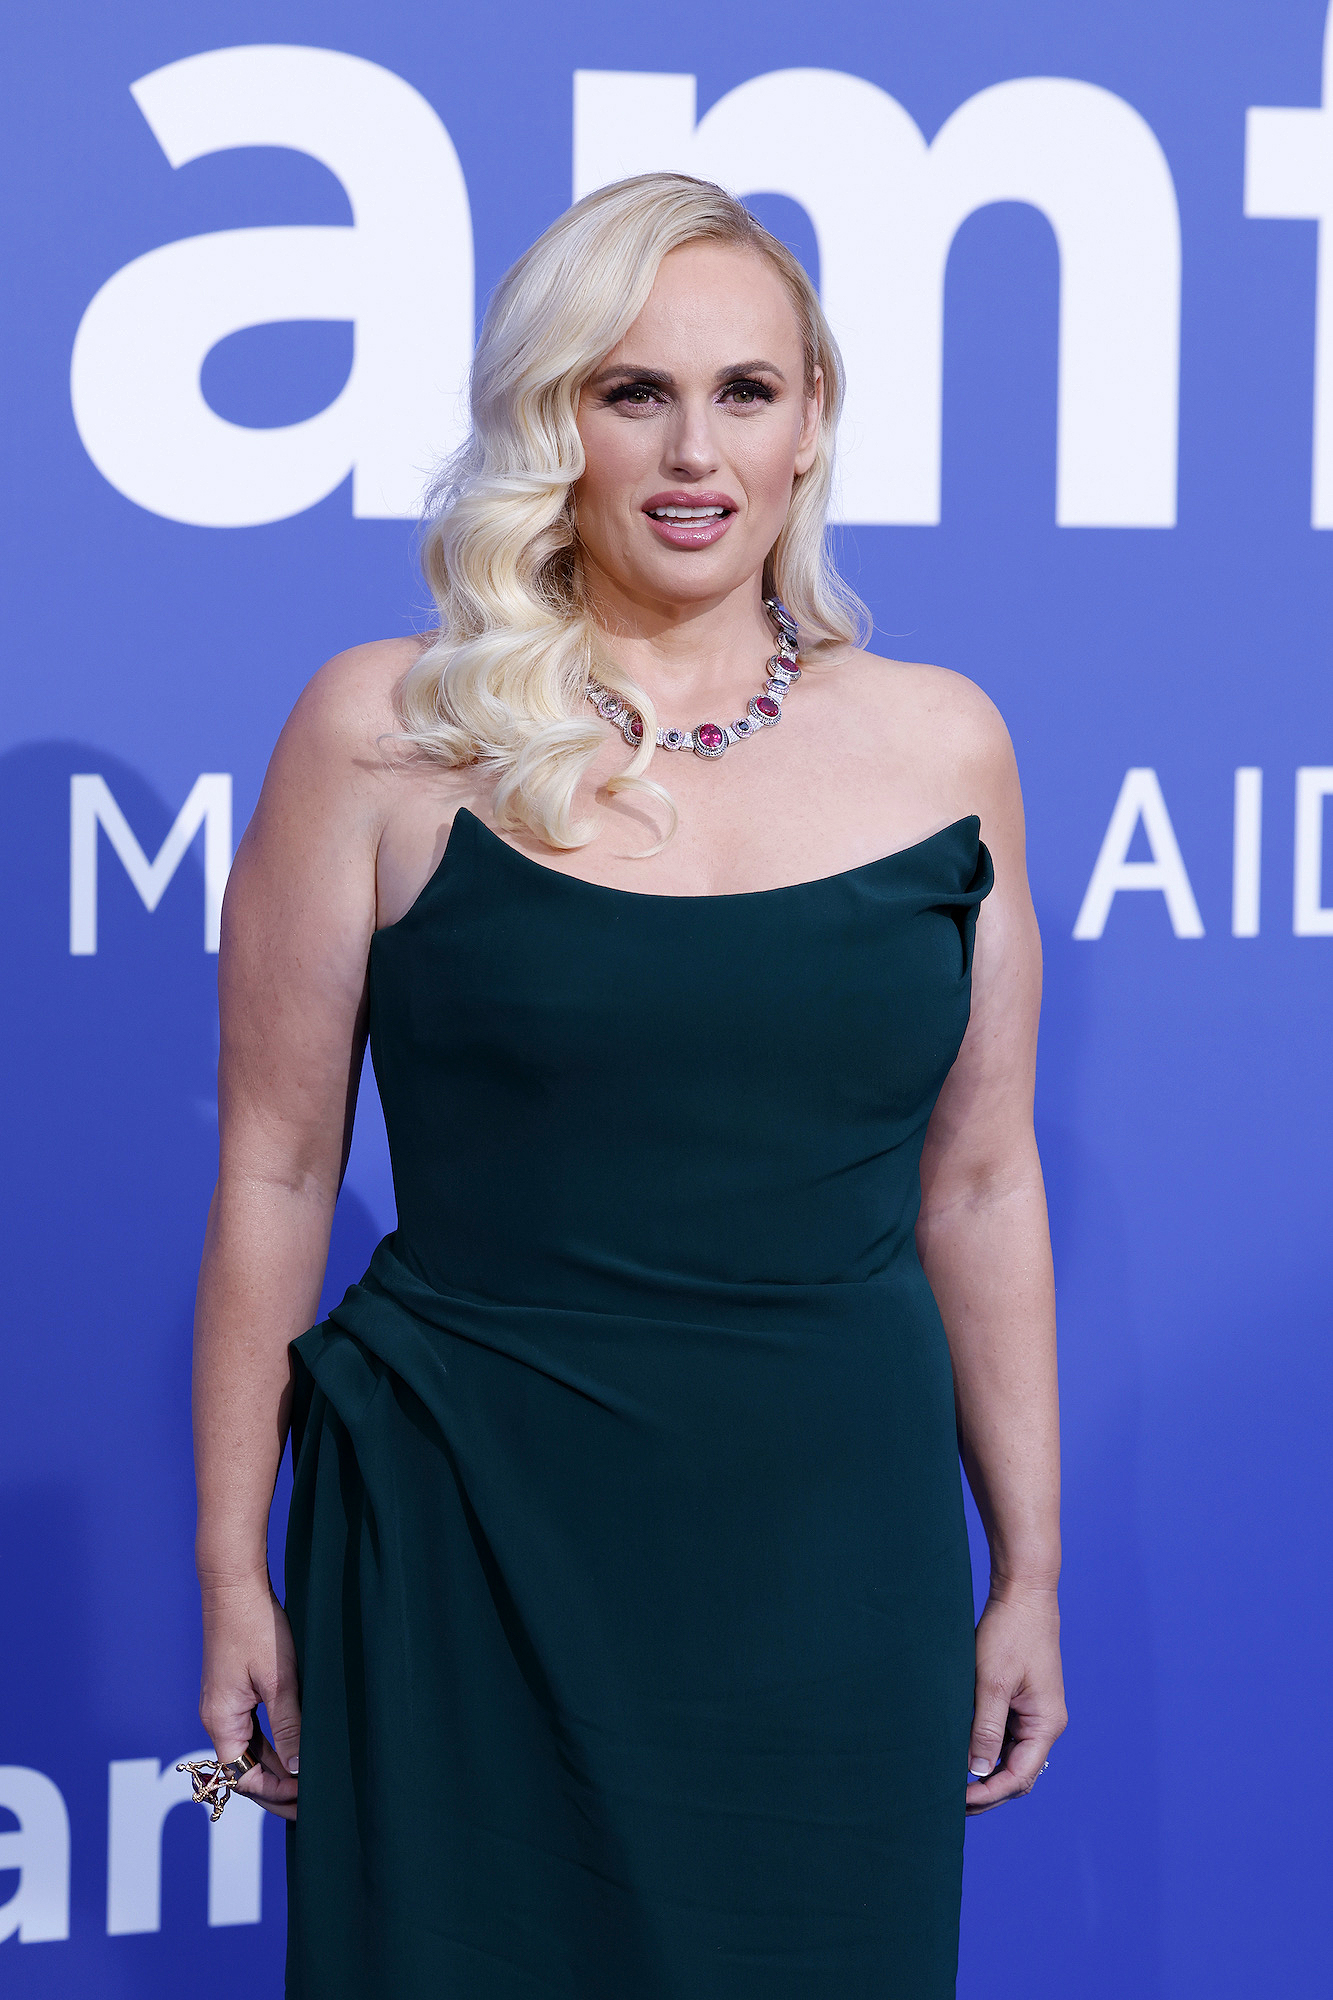 Rebel Wilson: People only need '600 calories a day' - Infinite Nest